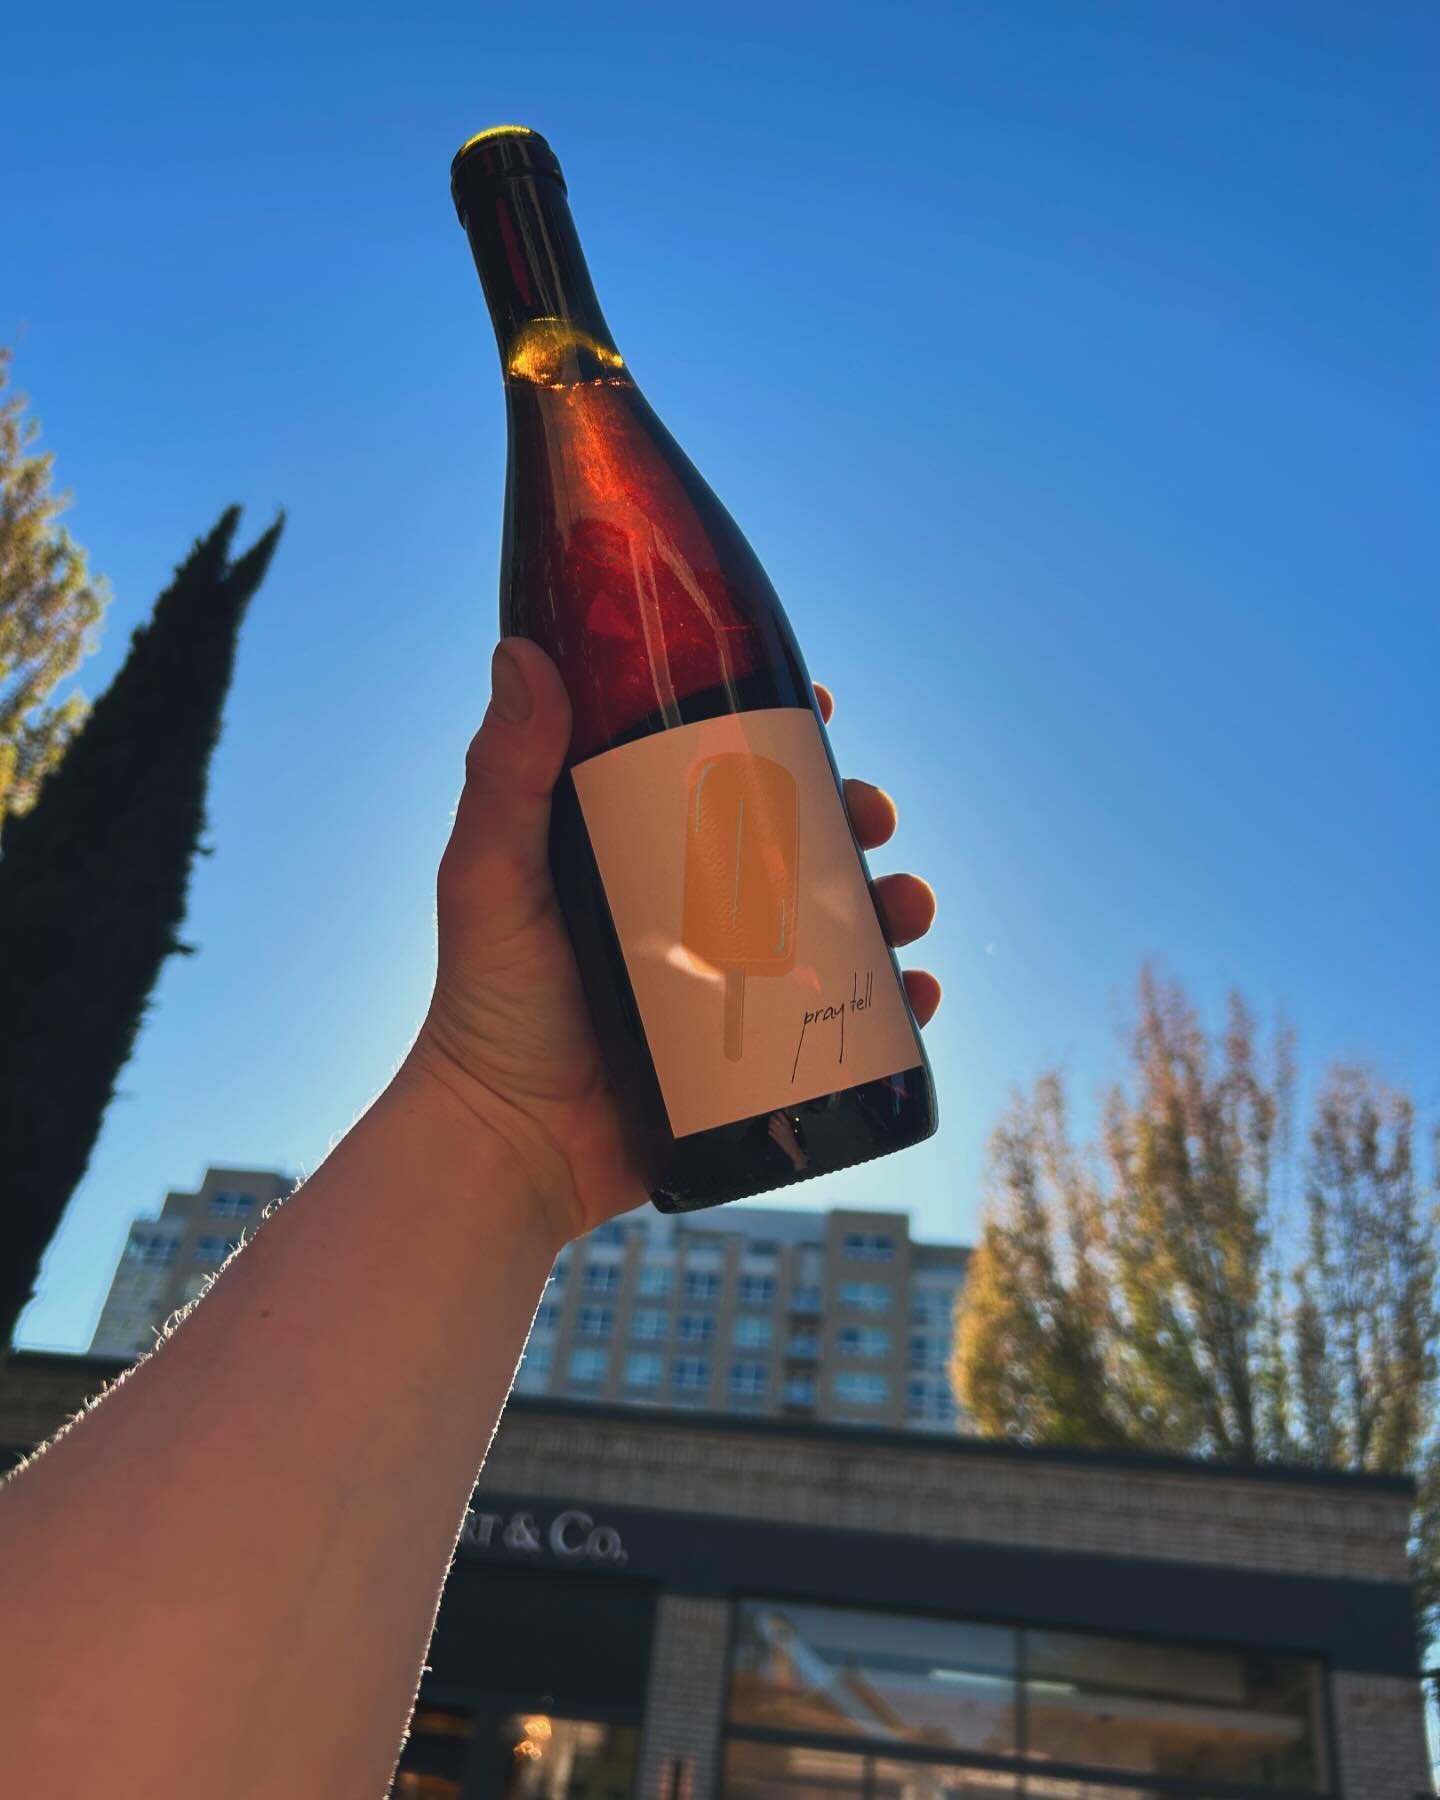 it might be cloudy today, but that isn&rsquo;t stopping new springtime releases from hitting the shelves. this week, we&rsquo;re loving the orange popsicle from @praytellwines. skin-contact pinot gris meanders down a lazy river of macerated chardonna